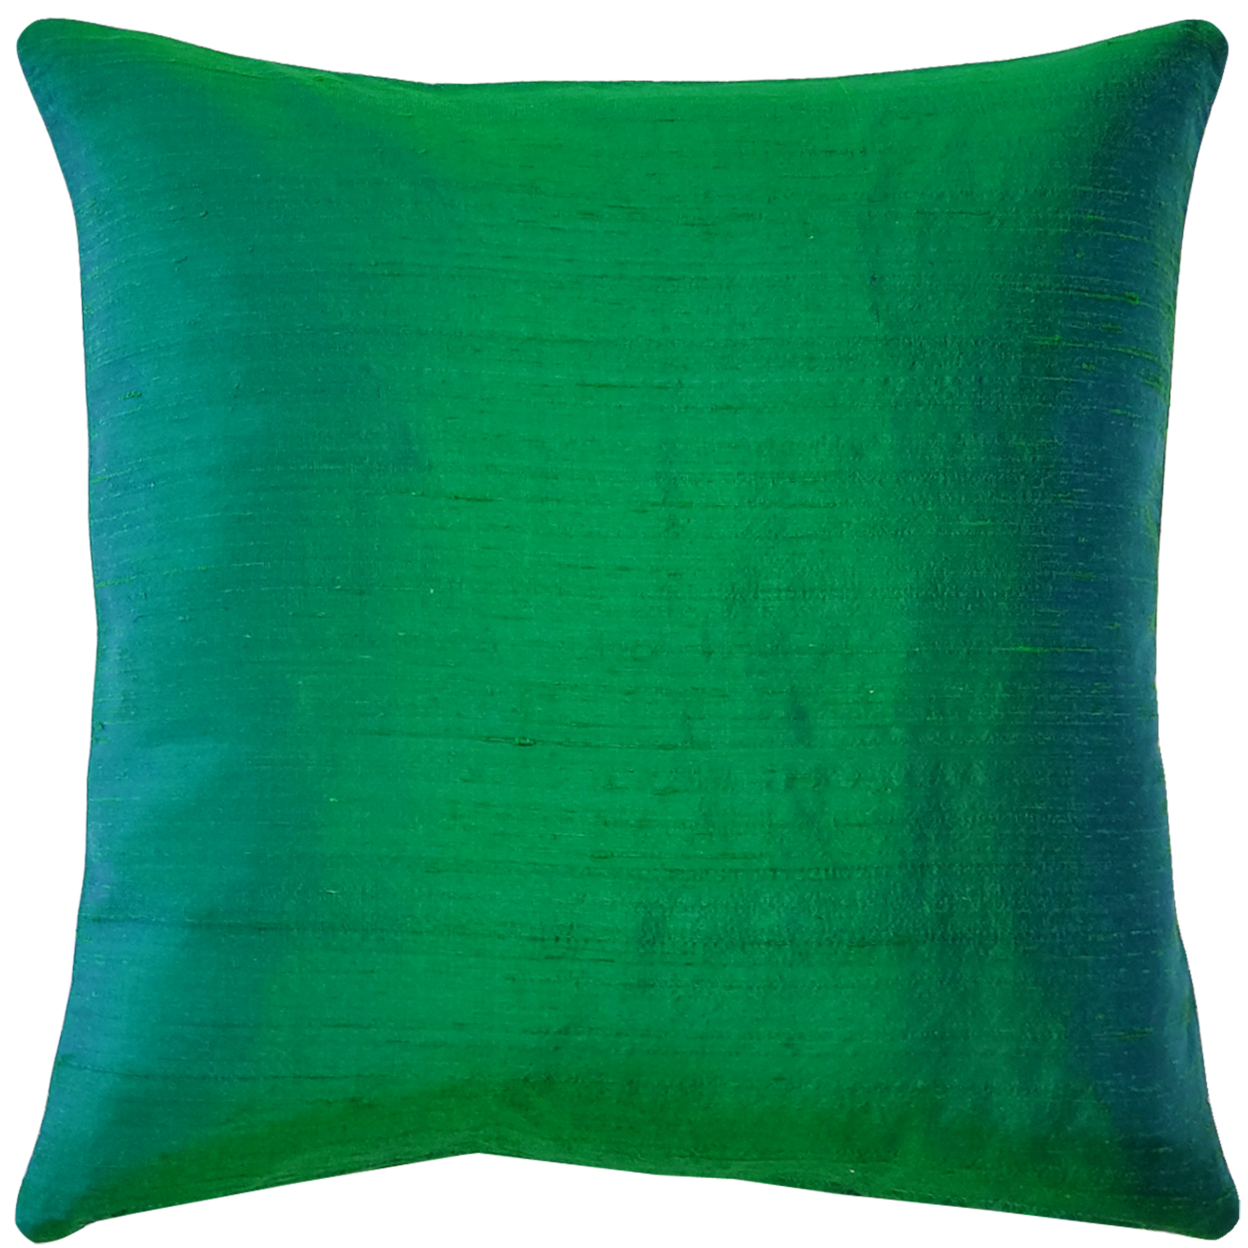 Sankara Emerald Green Silk Throw Pillow 18x18 Inches Square, Complete Pillow With Polyfill Pillow Insert